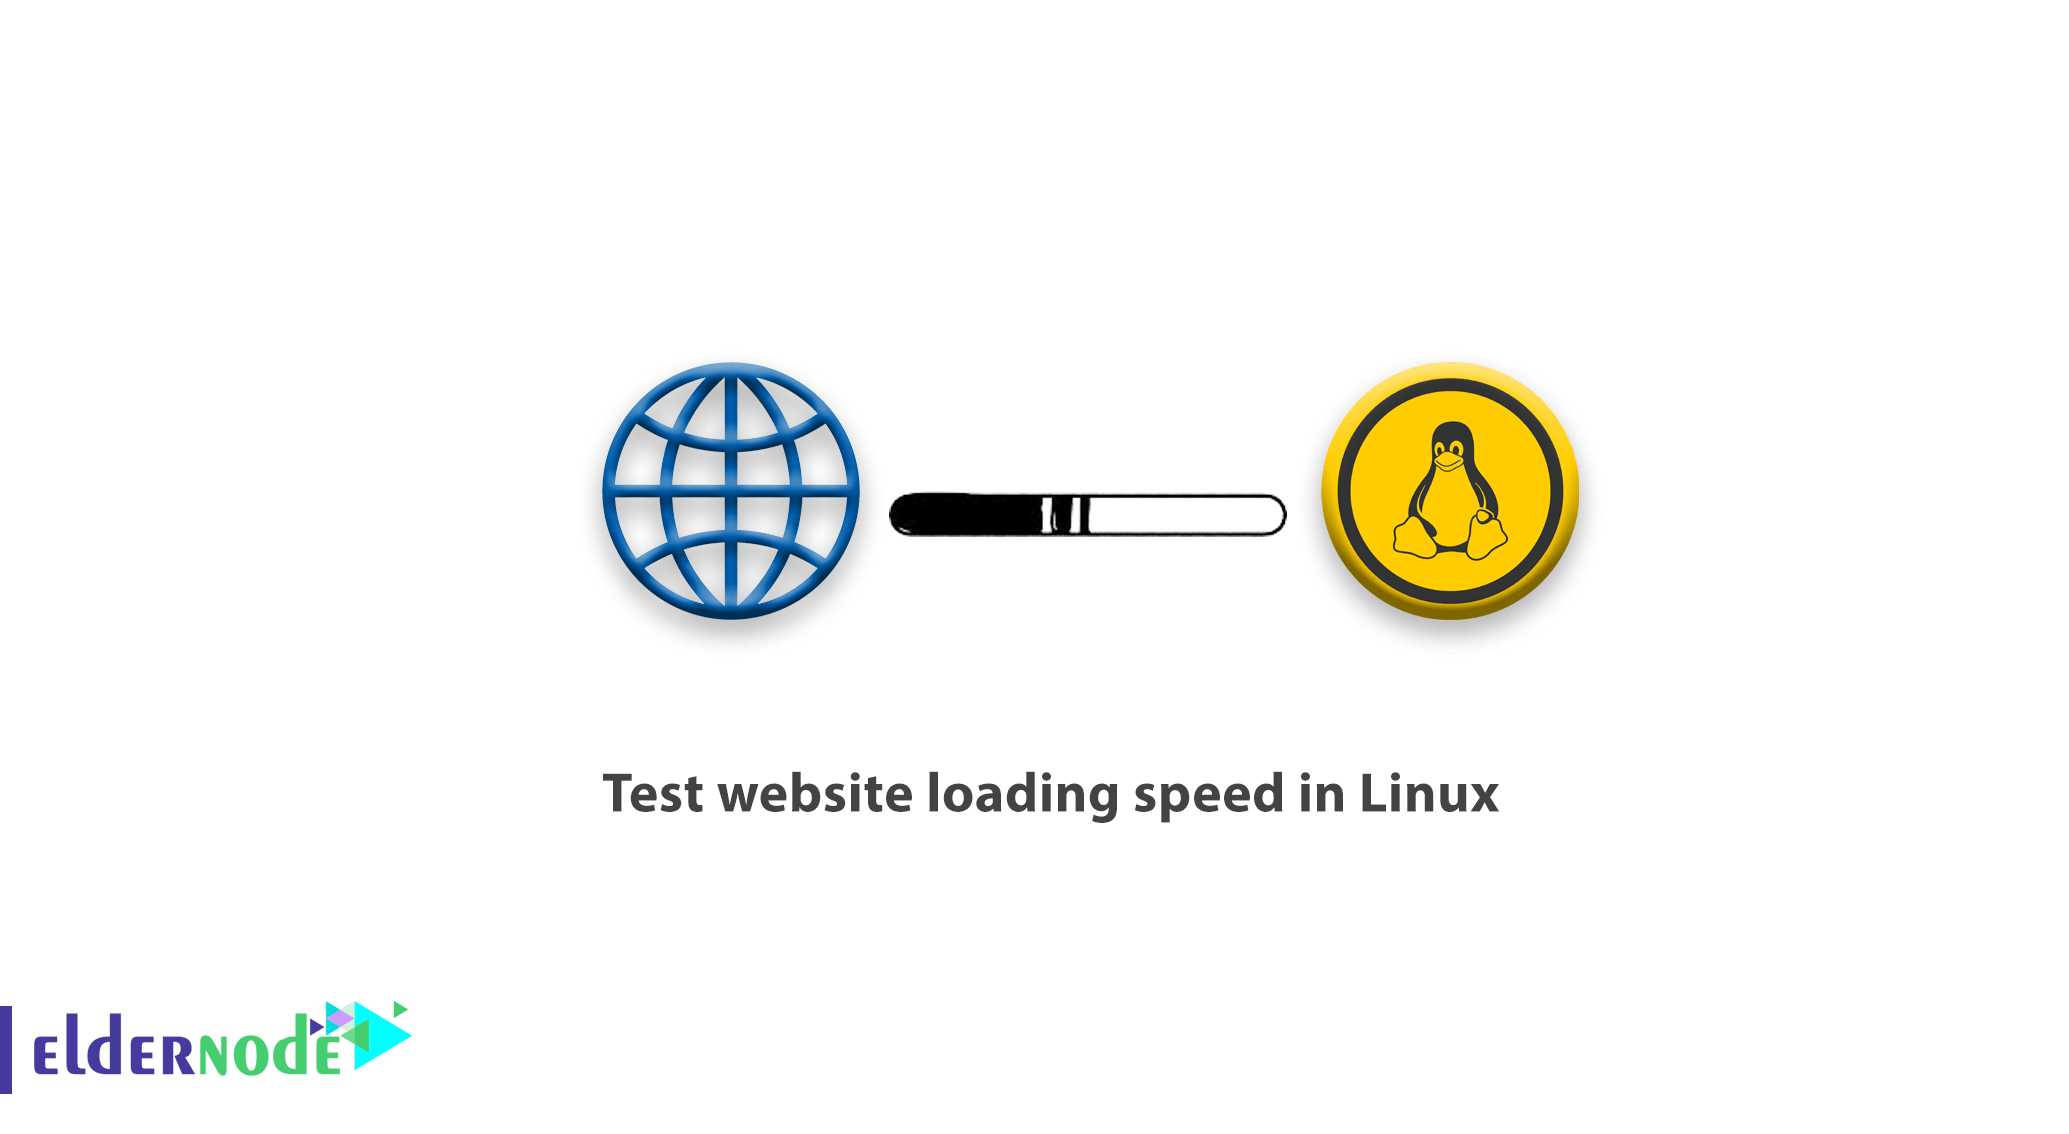 How to test website loading speed in Linux